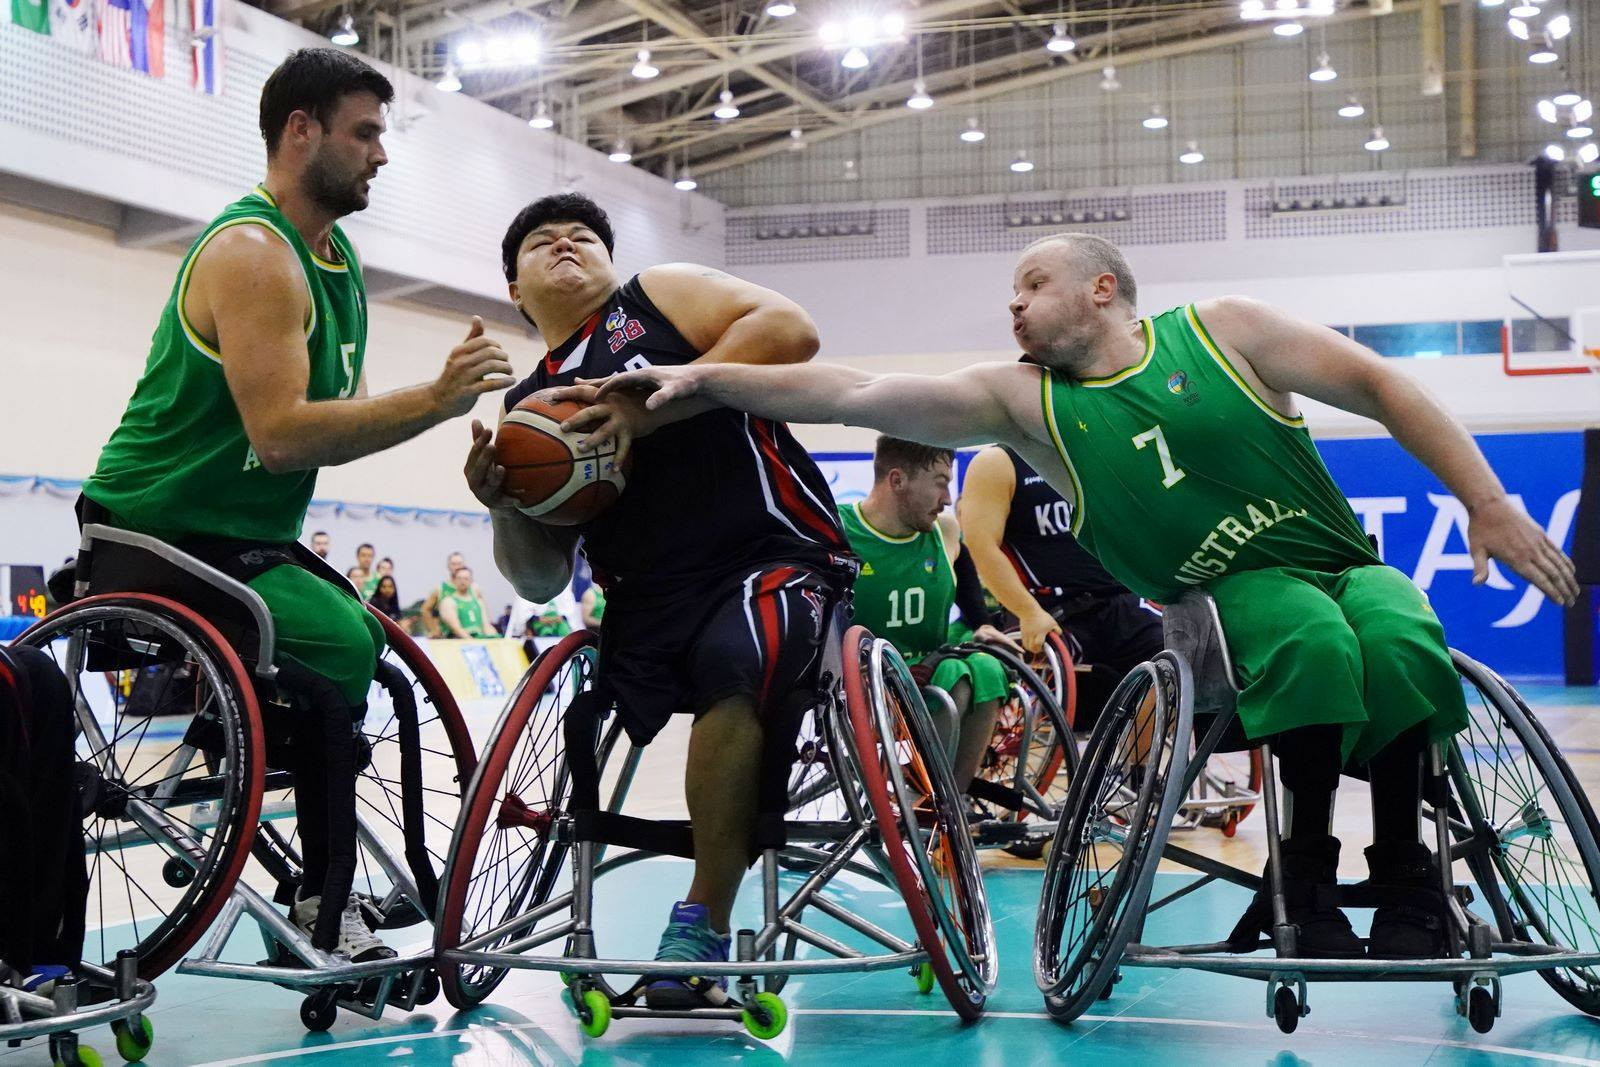 The number of players in a 3x3 wheelchair basketball team has been reduced from 5 to 4 ©IWBF